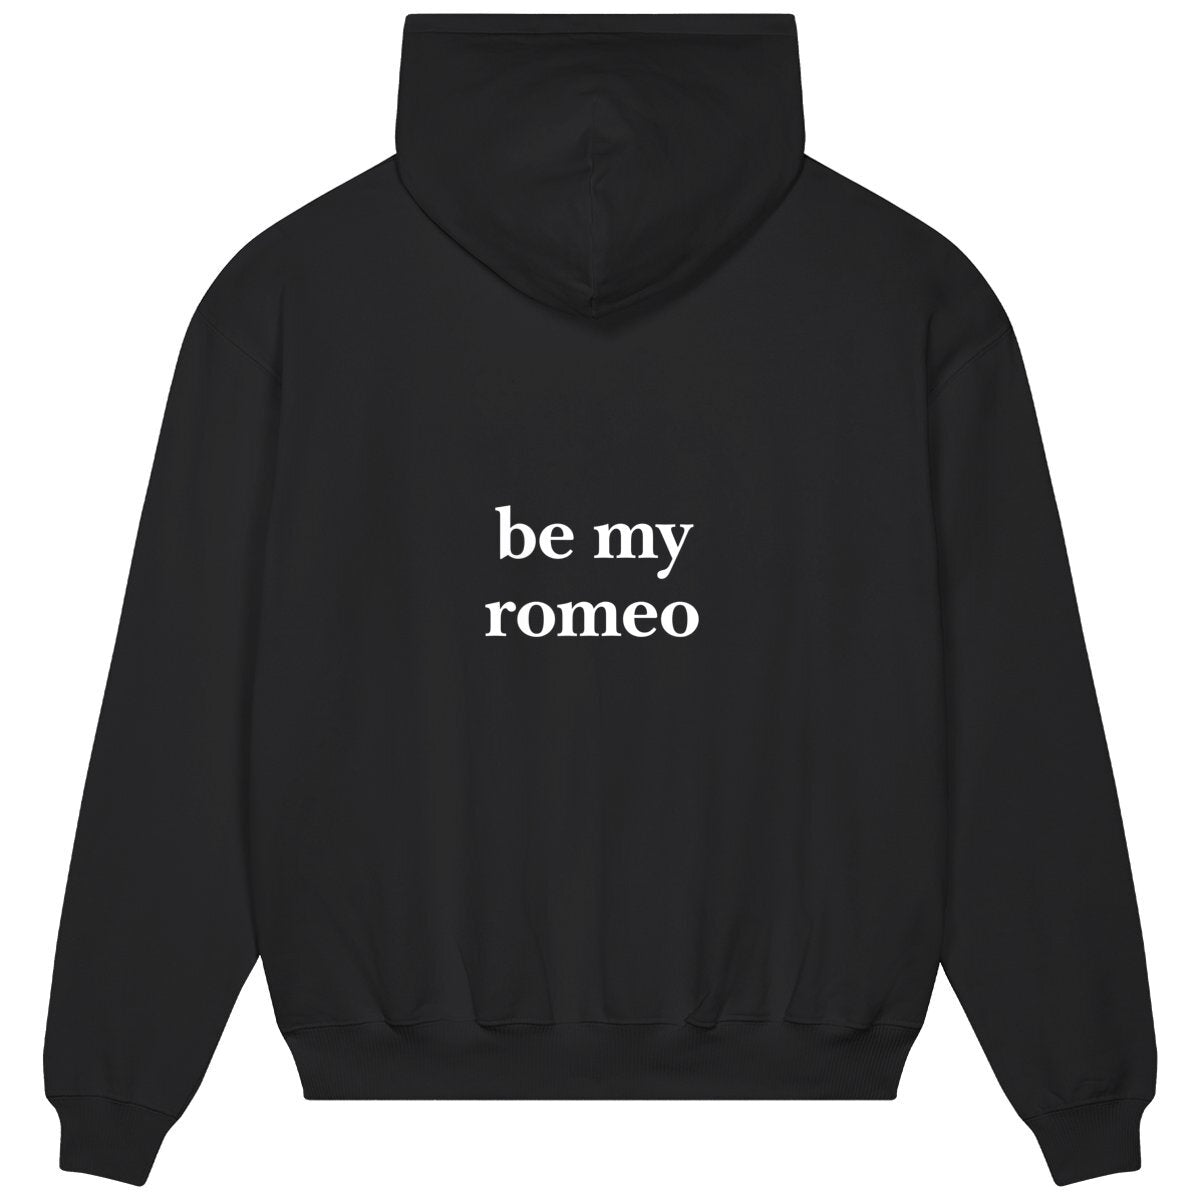 be my romeo hoodie oversized. garçon garçon essentiel oversized hoodie. Sleek in black and whispering Parisian chic, this hoodie is the sartorial whisper of 'garçon garçon' — a statement of understated elegance. Perfect for those who carry a piece of Paris in their hearts and a touch of audacity on their sleeves.